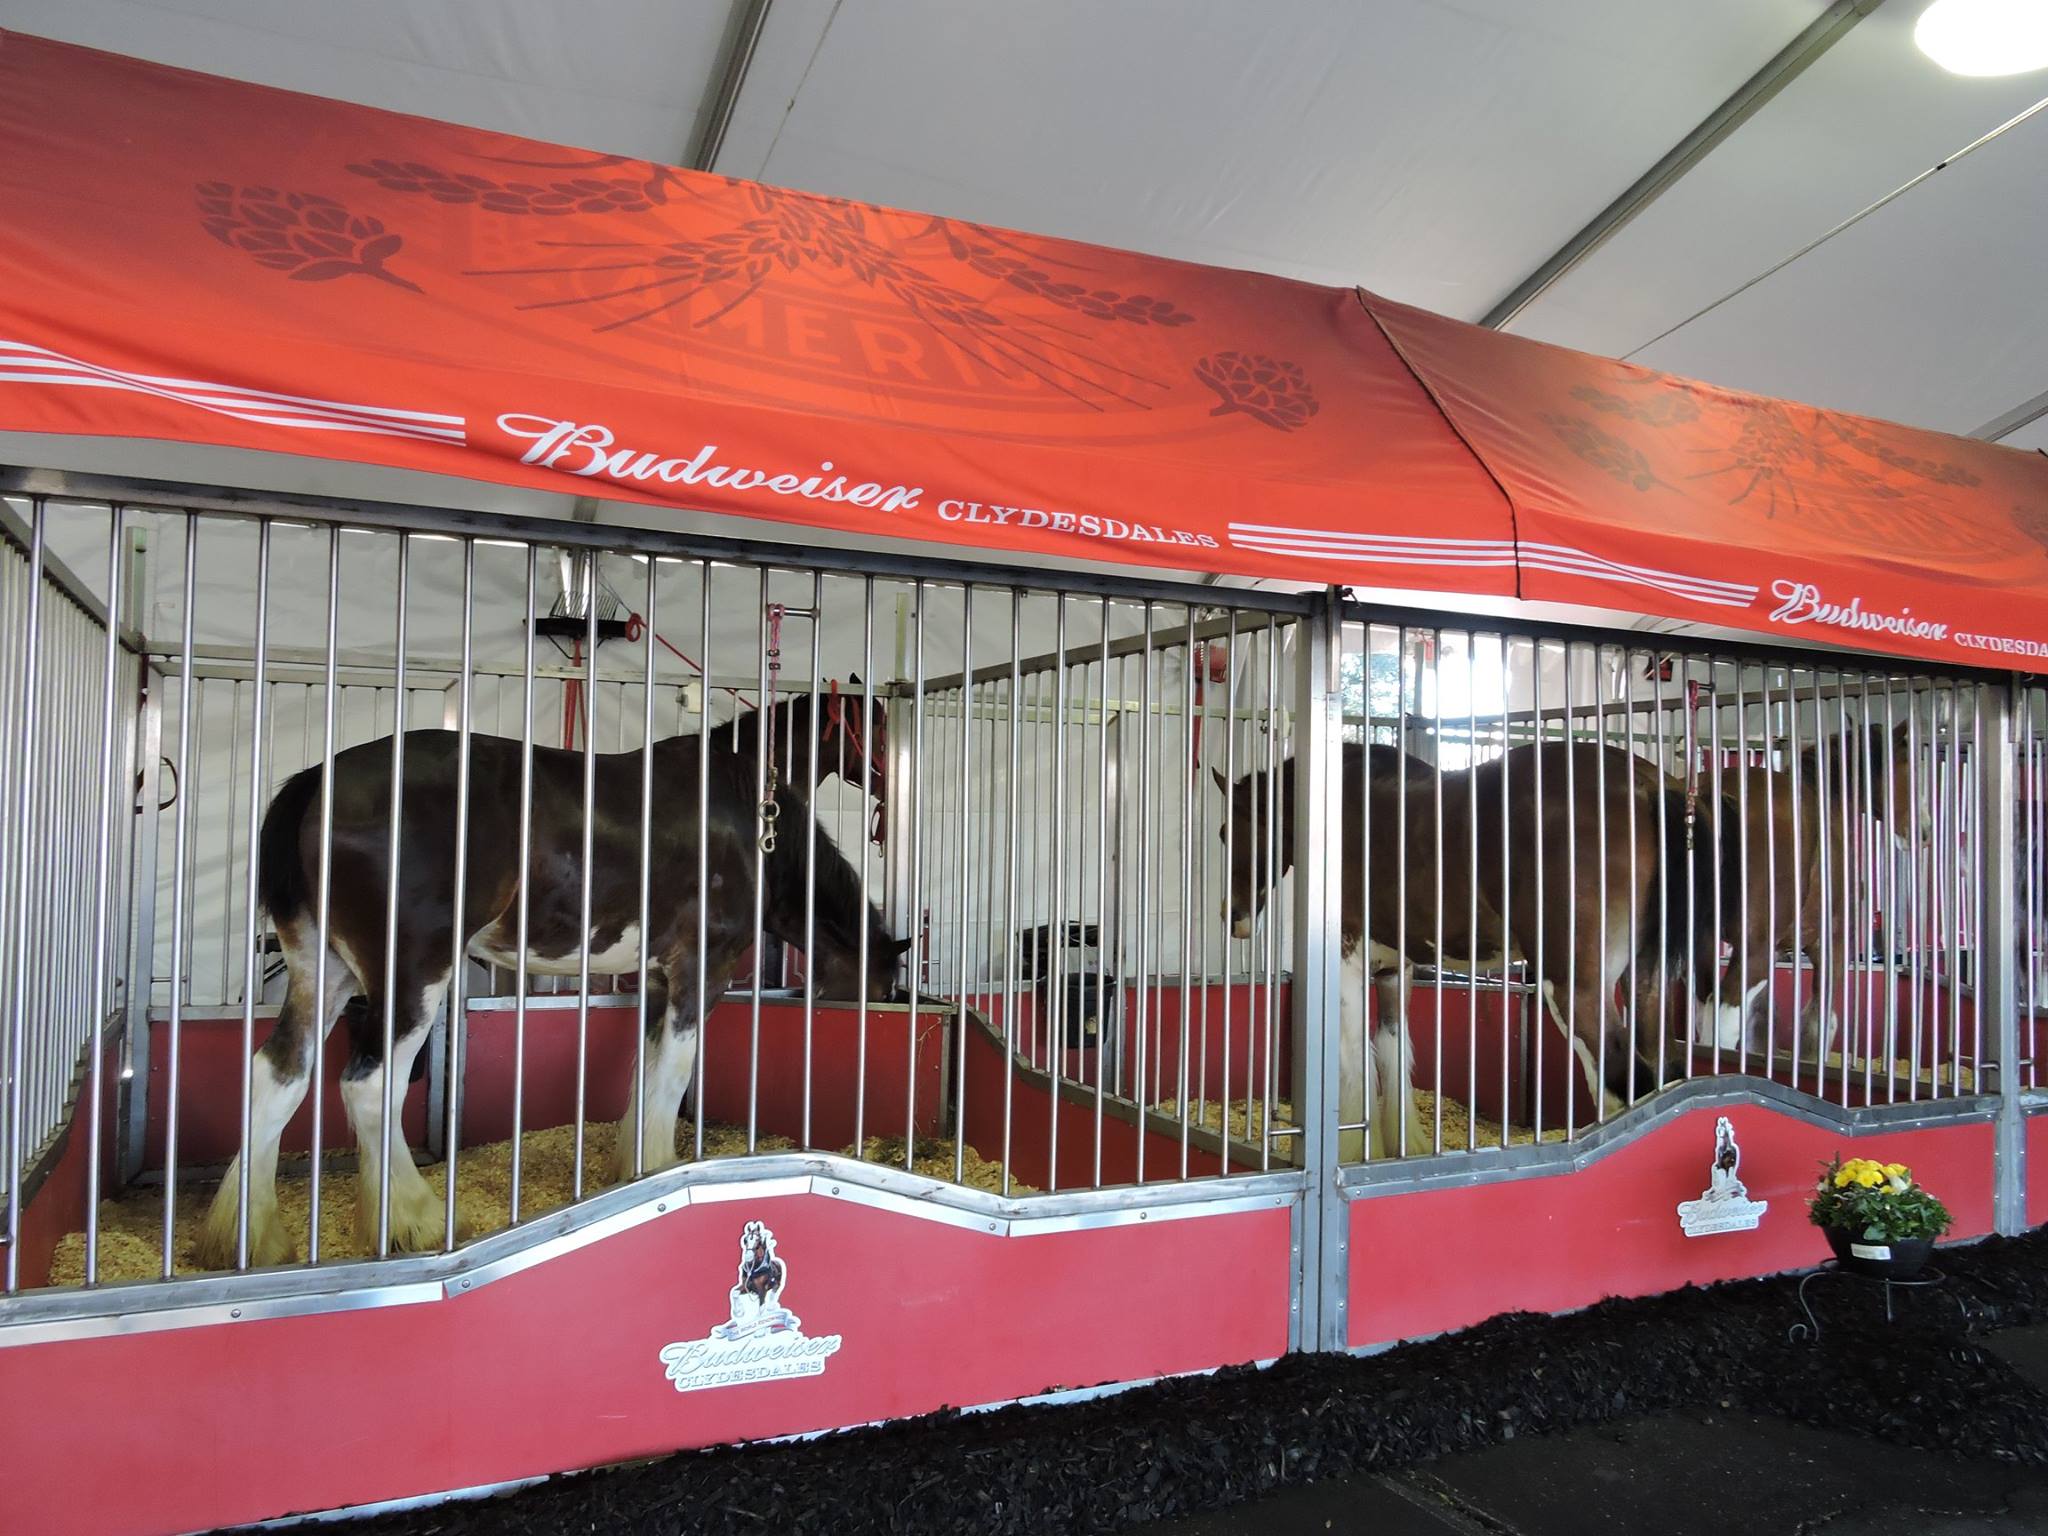 Budweiser's Clydesdales return to Fairfield for Super Bowl 50 ...